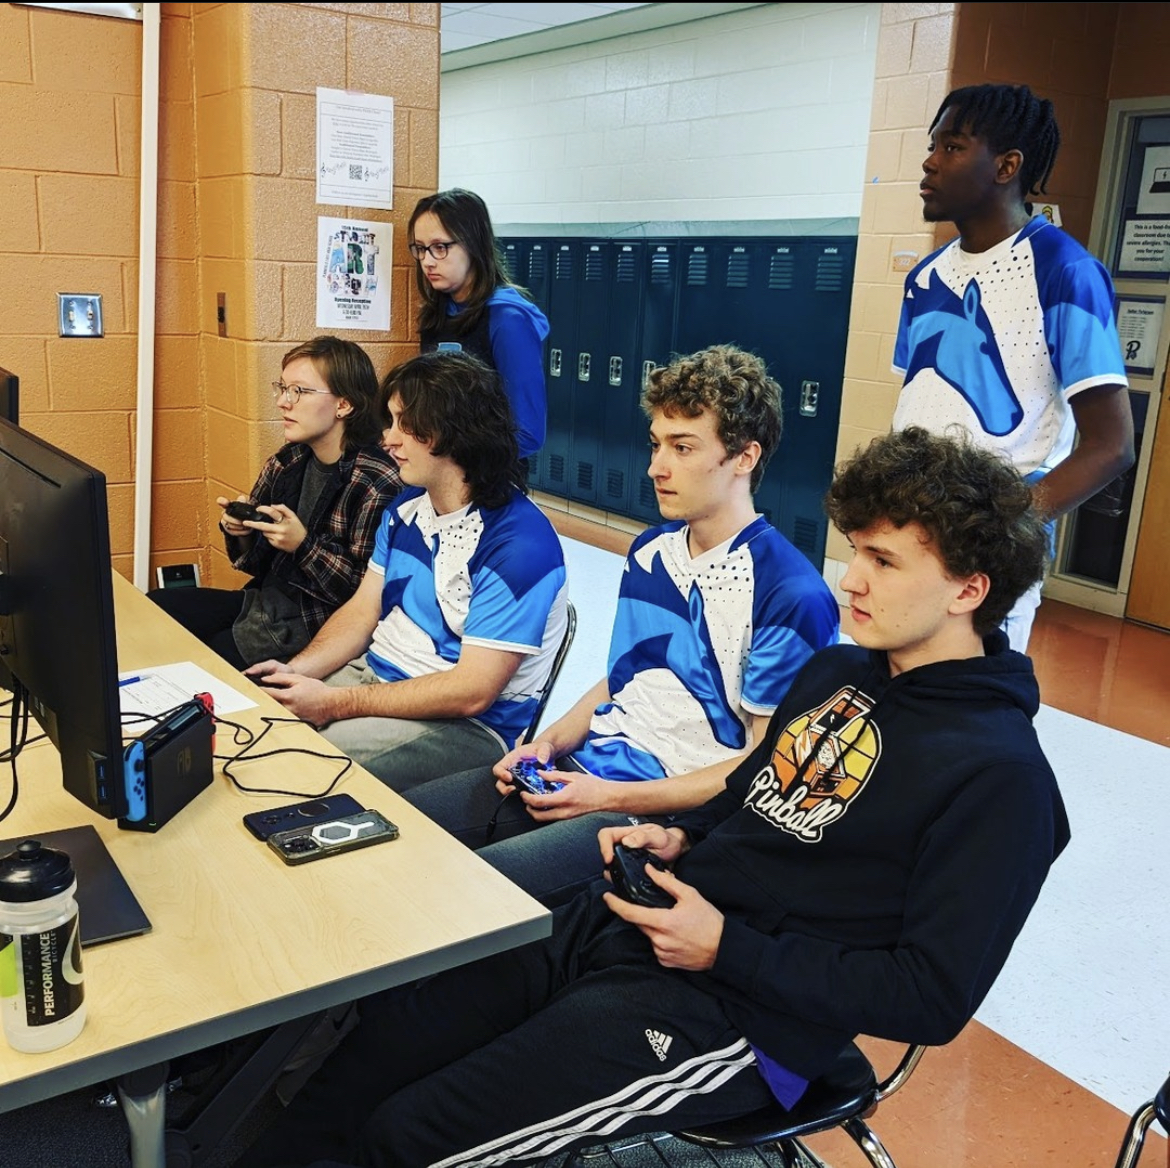 Meliukstis (first row, second to the right) plays for the Mario Kart team at sectionals, placing fourth.